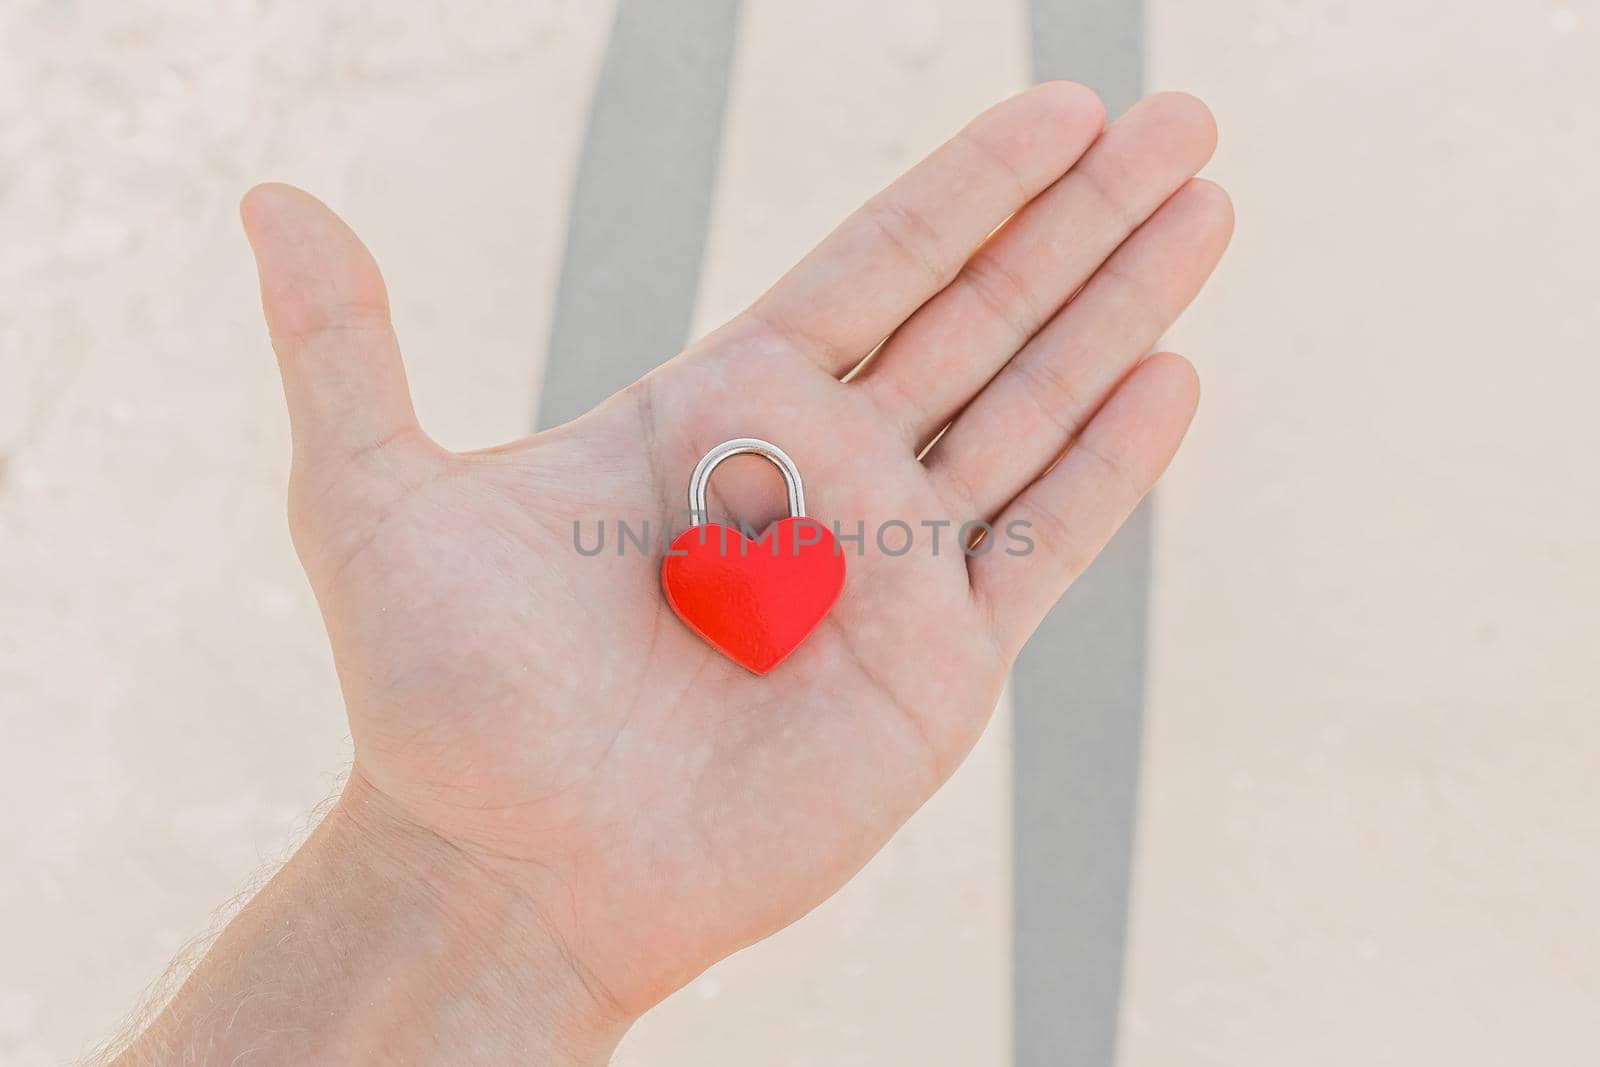 In the man's hand lies a small red heart in the form of a castle, a sign or symbol of love and romantic relationships.